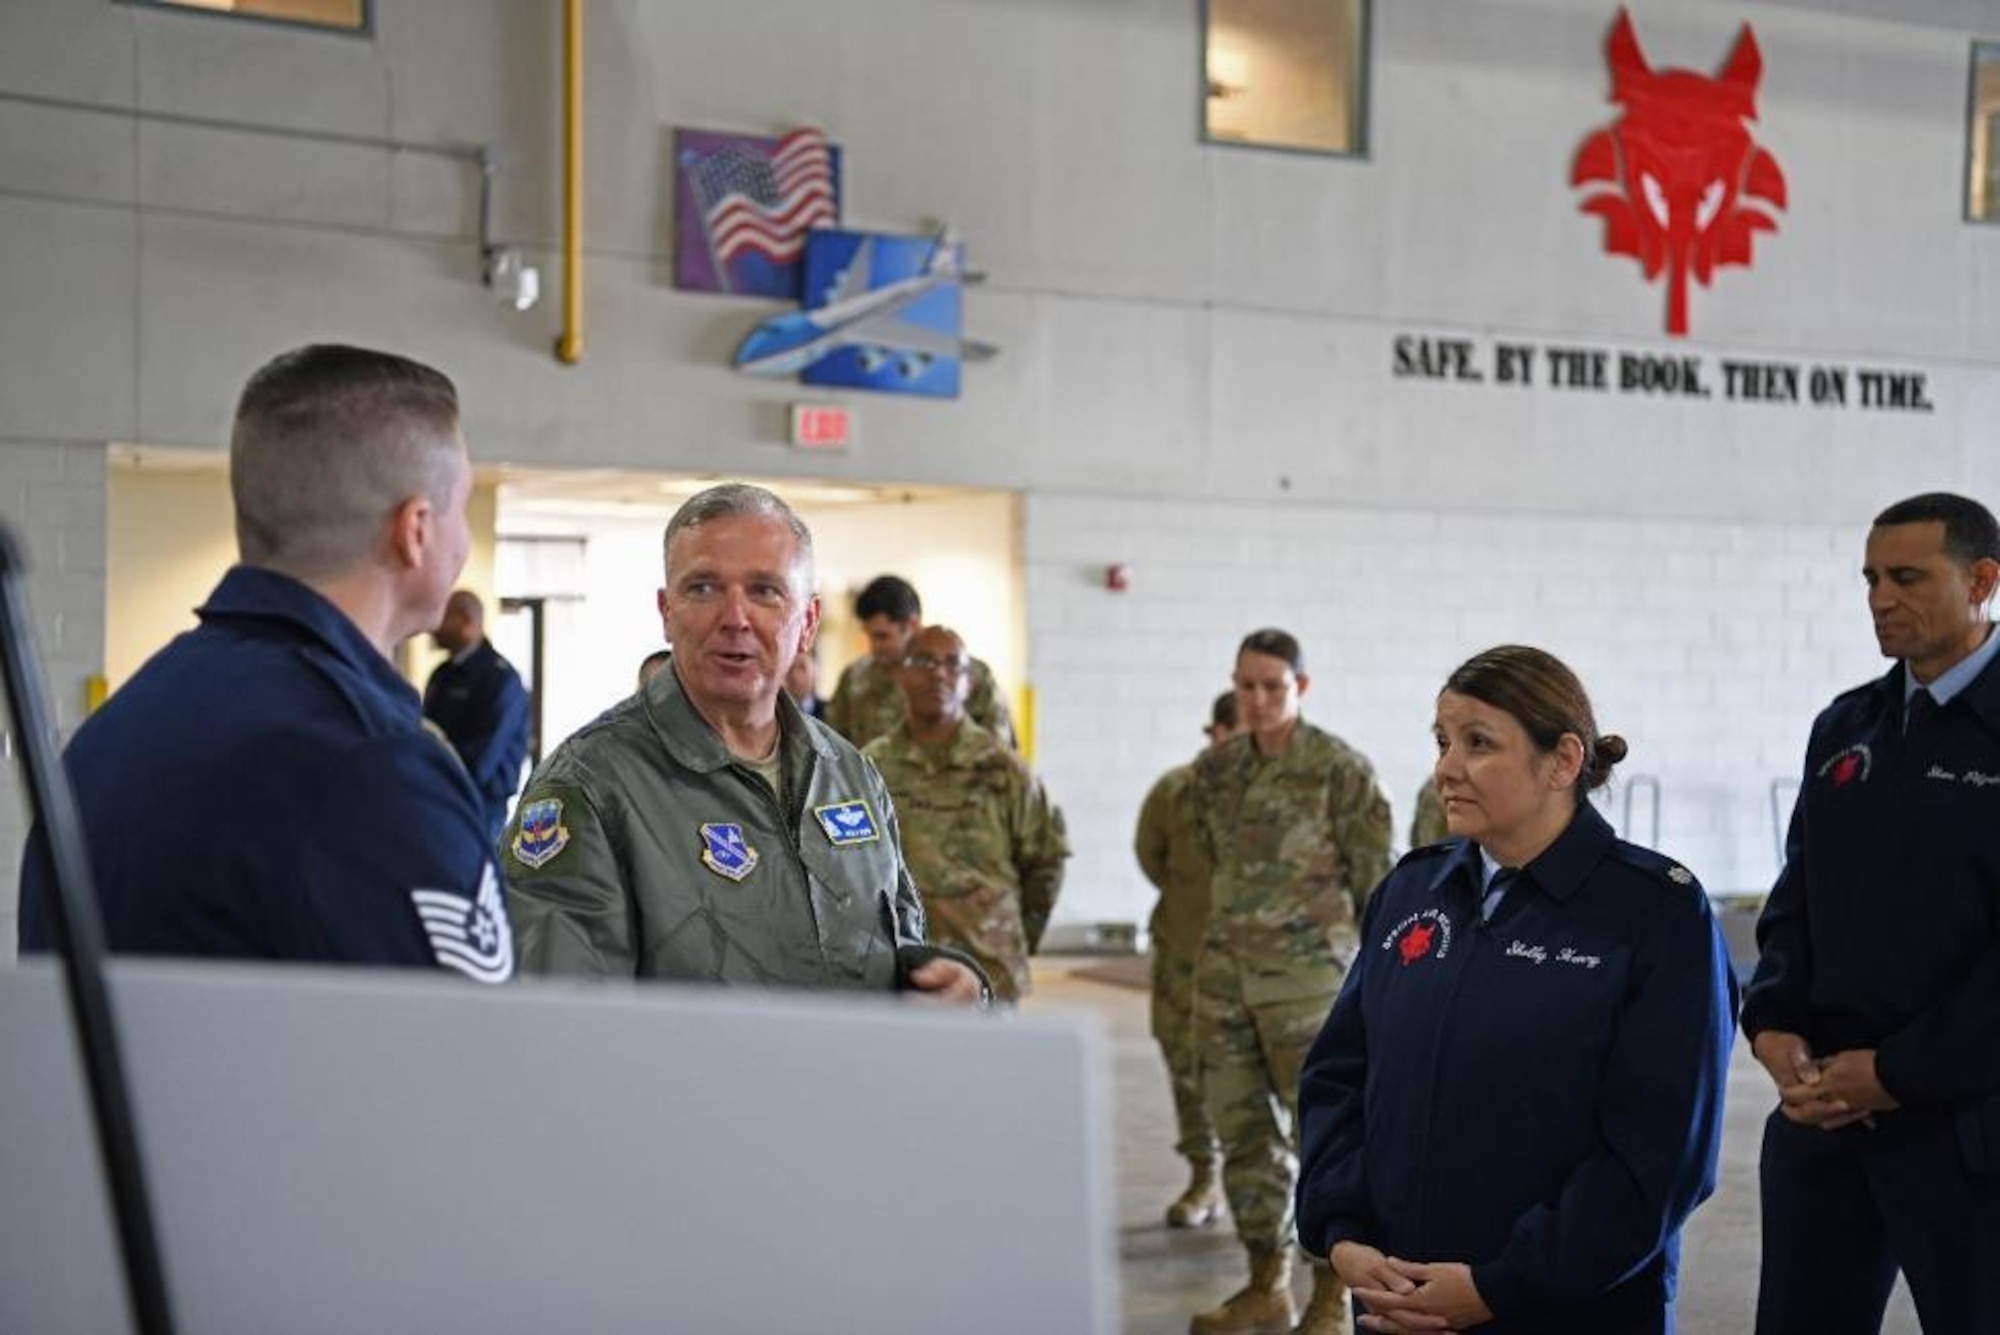 Air Force District of Washington Commander Maj. Gen. Ricky N. Rupp, middle, speaks with members of the 89th Aerial Port Squadron during an 89th Airlift Wing Immersion Tour on Joint Base Andrews, Maryland, Feb. 28, 2020. Rupp, and other leaders of AFDW and the 11th Wing were invited to the tour to help familiarize themselves with the mission and operations of the 89th Airlift Wing. Rupp is also the 320th Air Expeditionary Wing commander, a provisional unit of AFDW. (U.S. Air Force photo by Tech. Sgt. Kentavist P. Brackin)